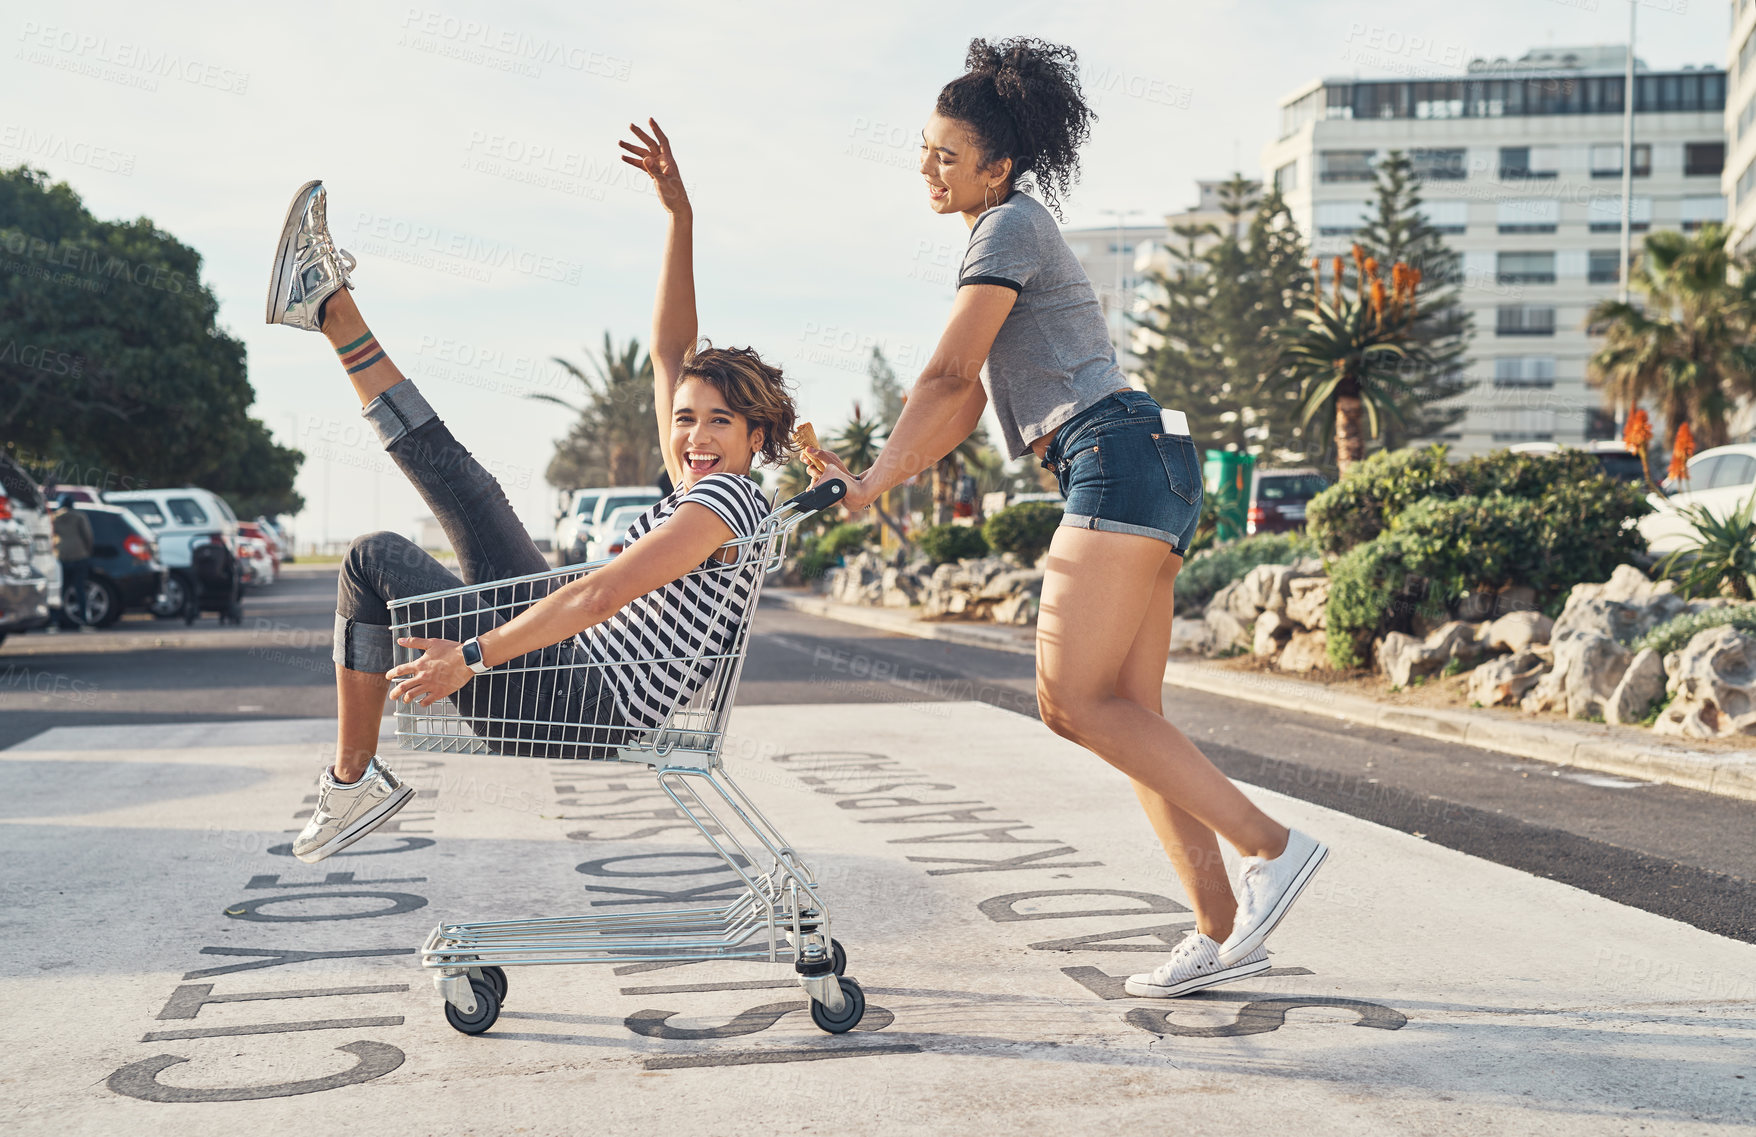 Buy stock photo Shot of a young woman pushing her friend around on the promenade in a shopping chart